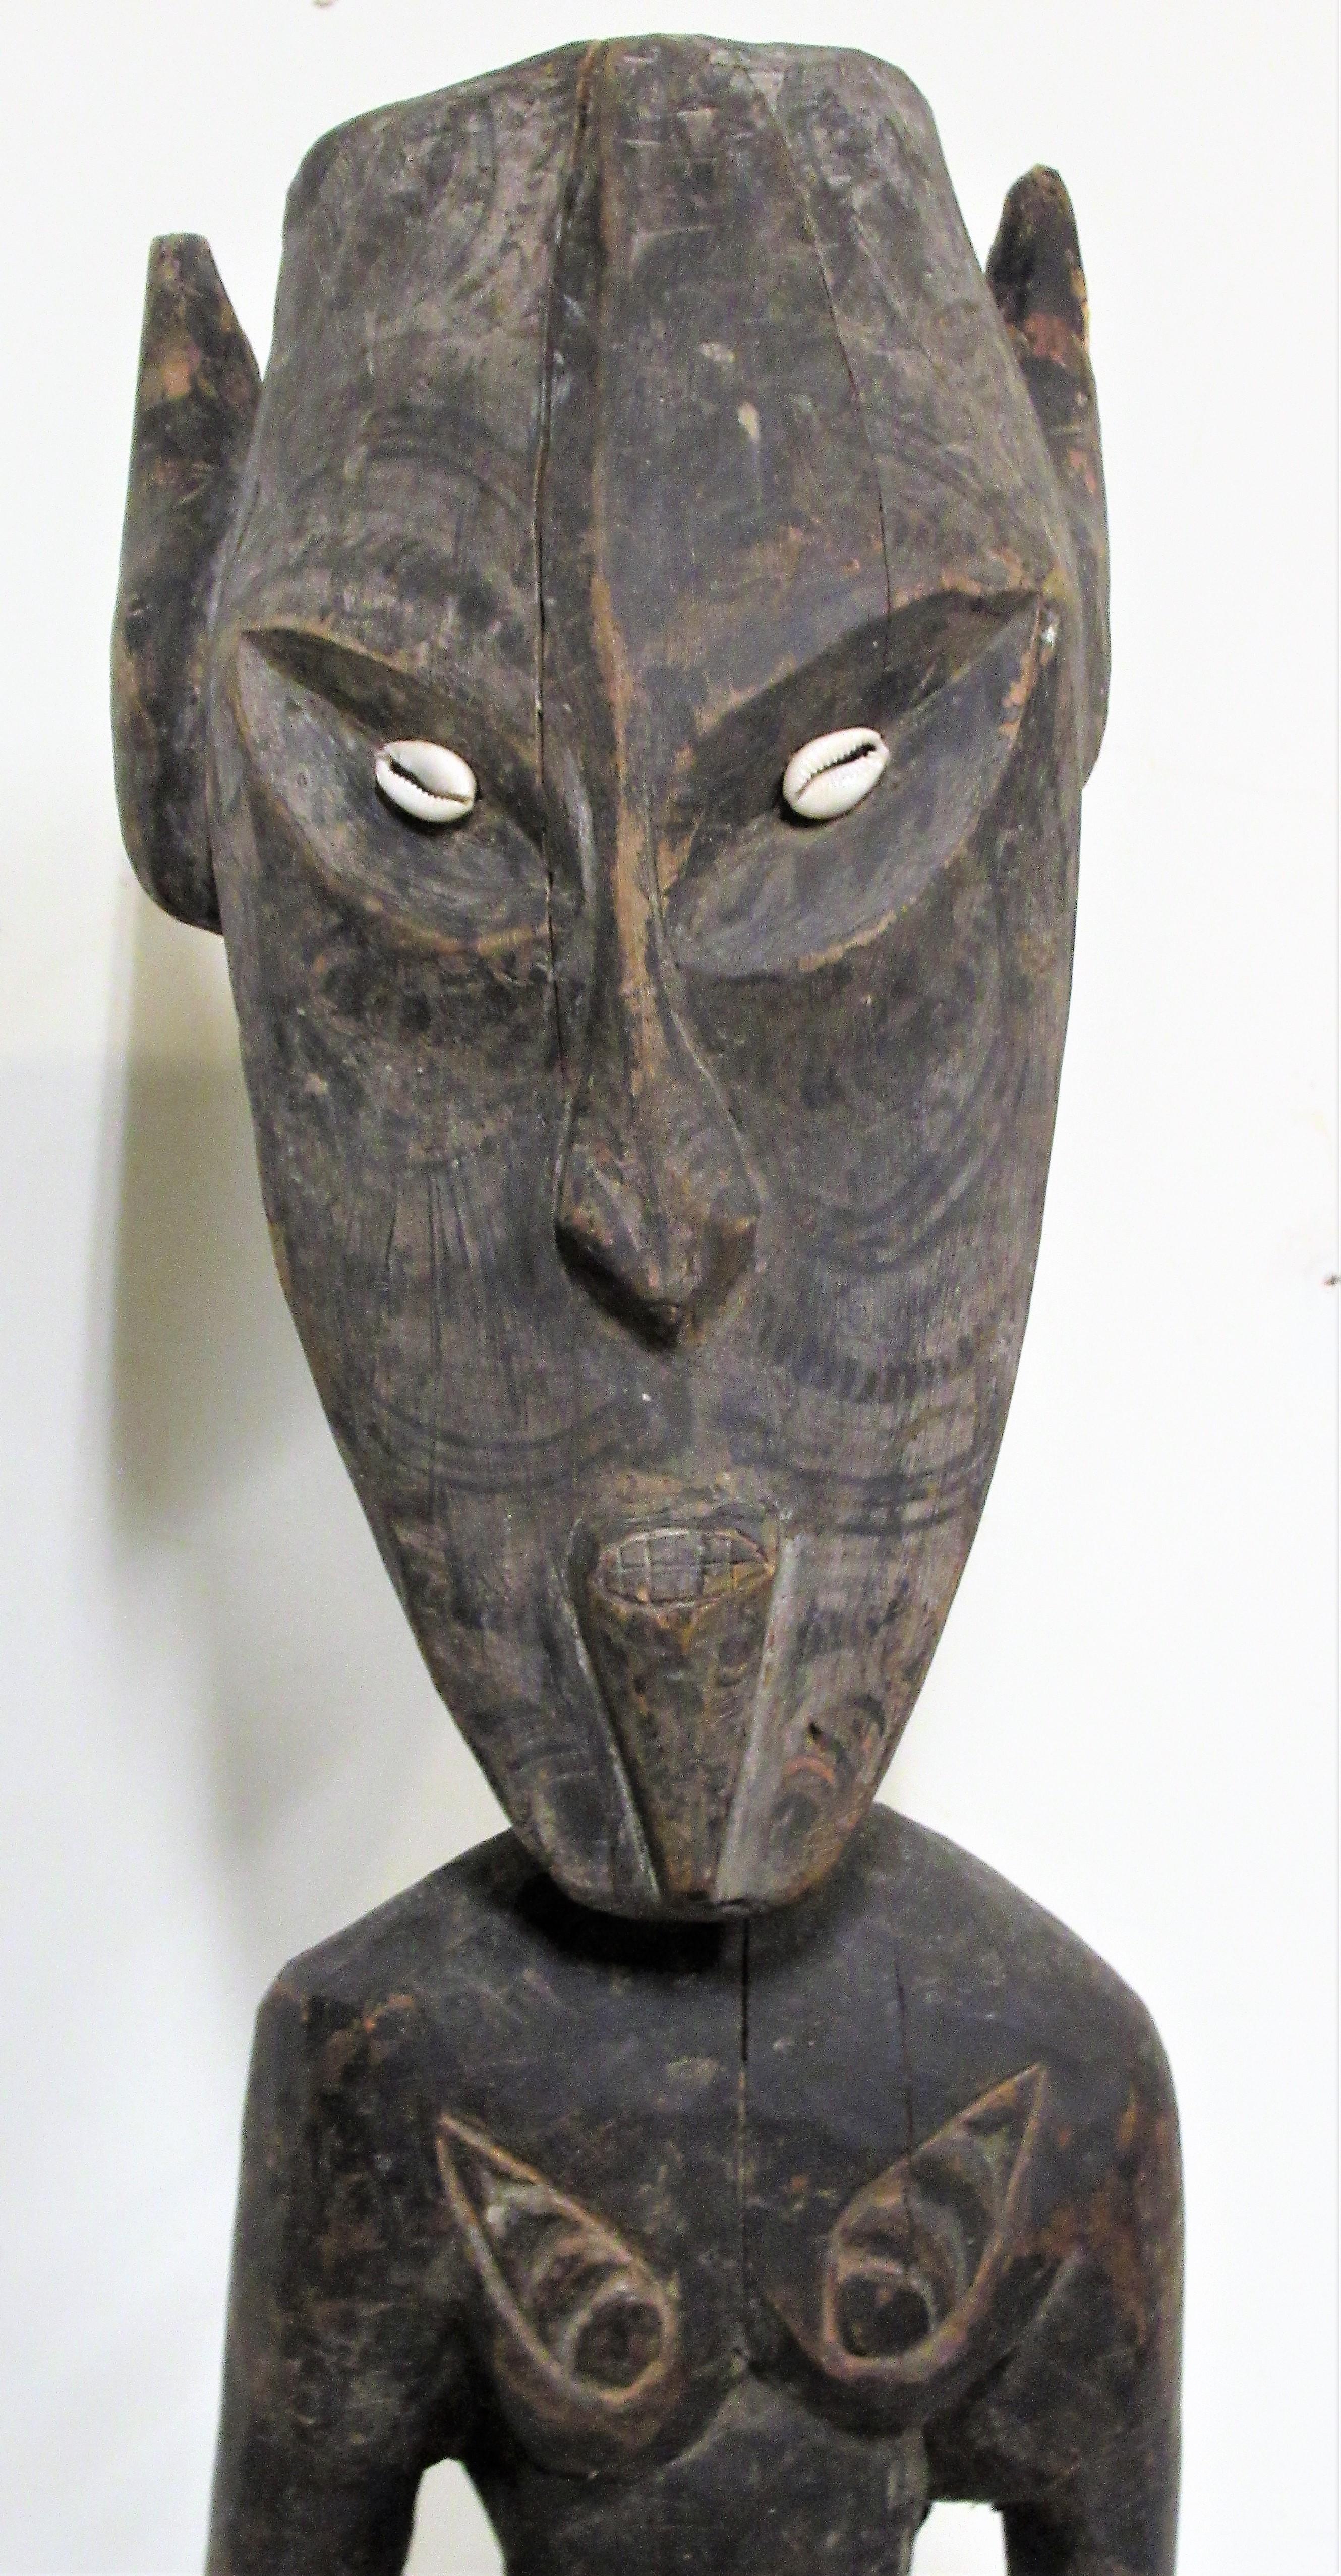 Papua New Guinea standing male ancestral figure, hand carved from a single piece of wood. Beautifully aged old pigmented surface with finely decorated facial features and shell eyes. Great looking bold powerful presence. Sepik River, circa 1930 -